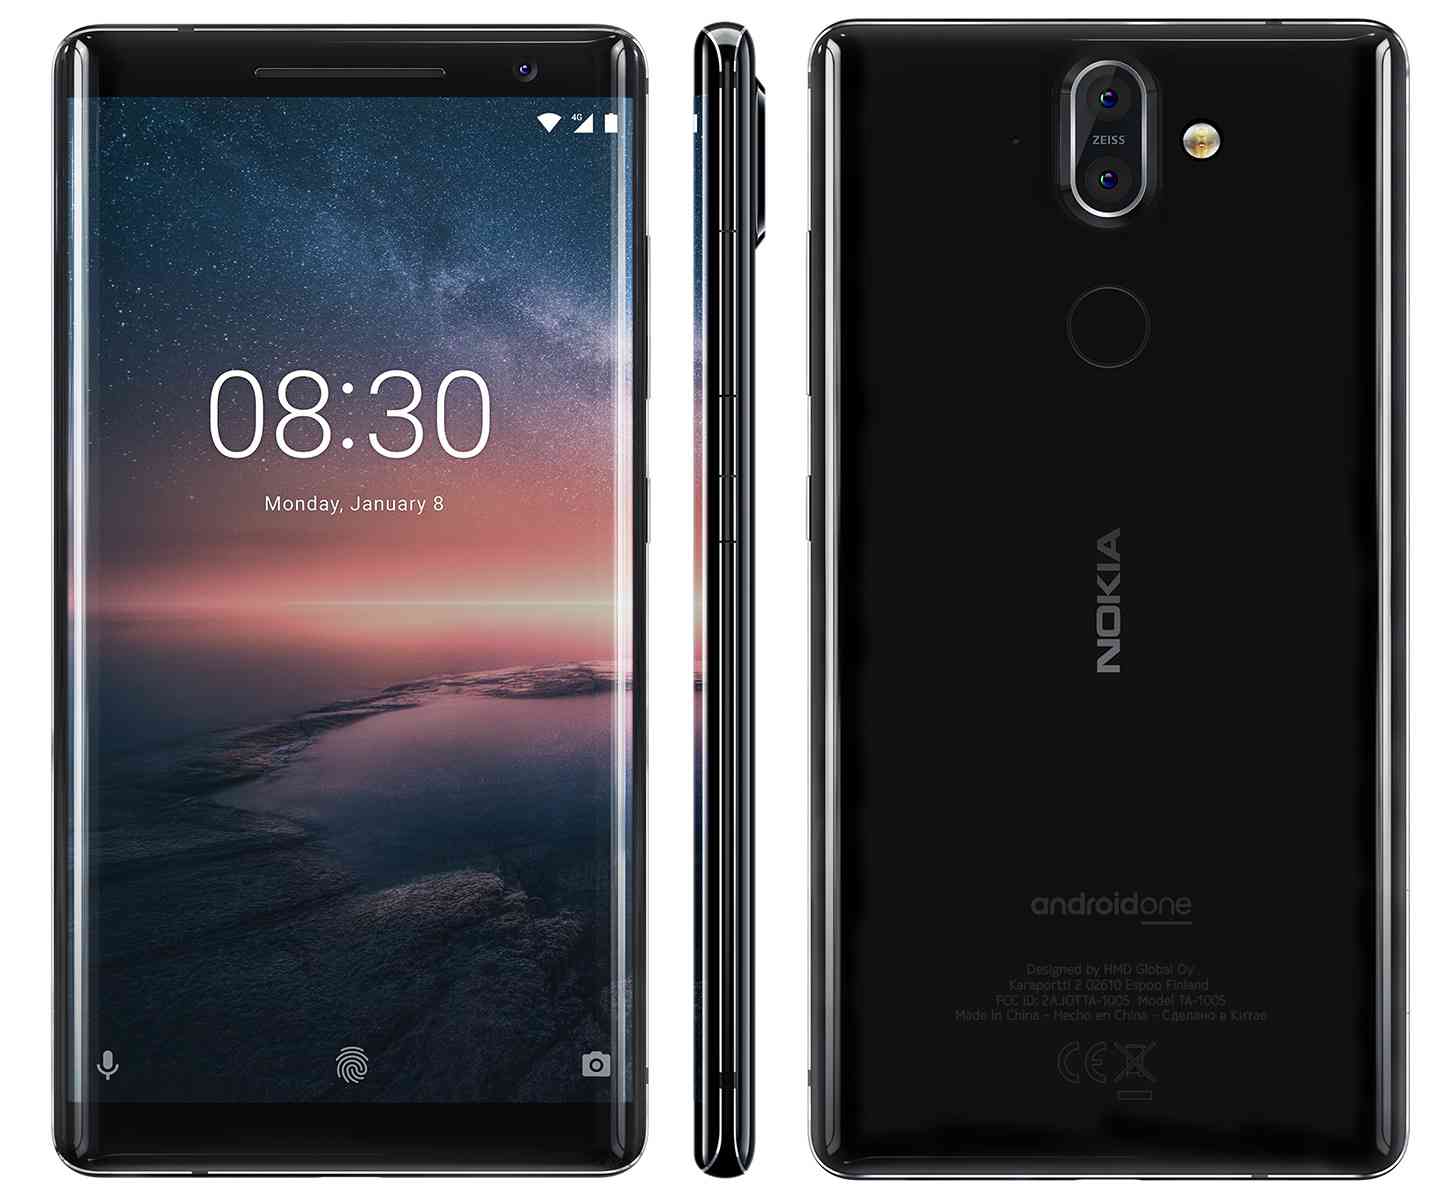 Nokia 8 Sirocco official images